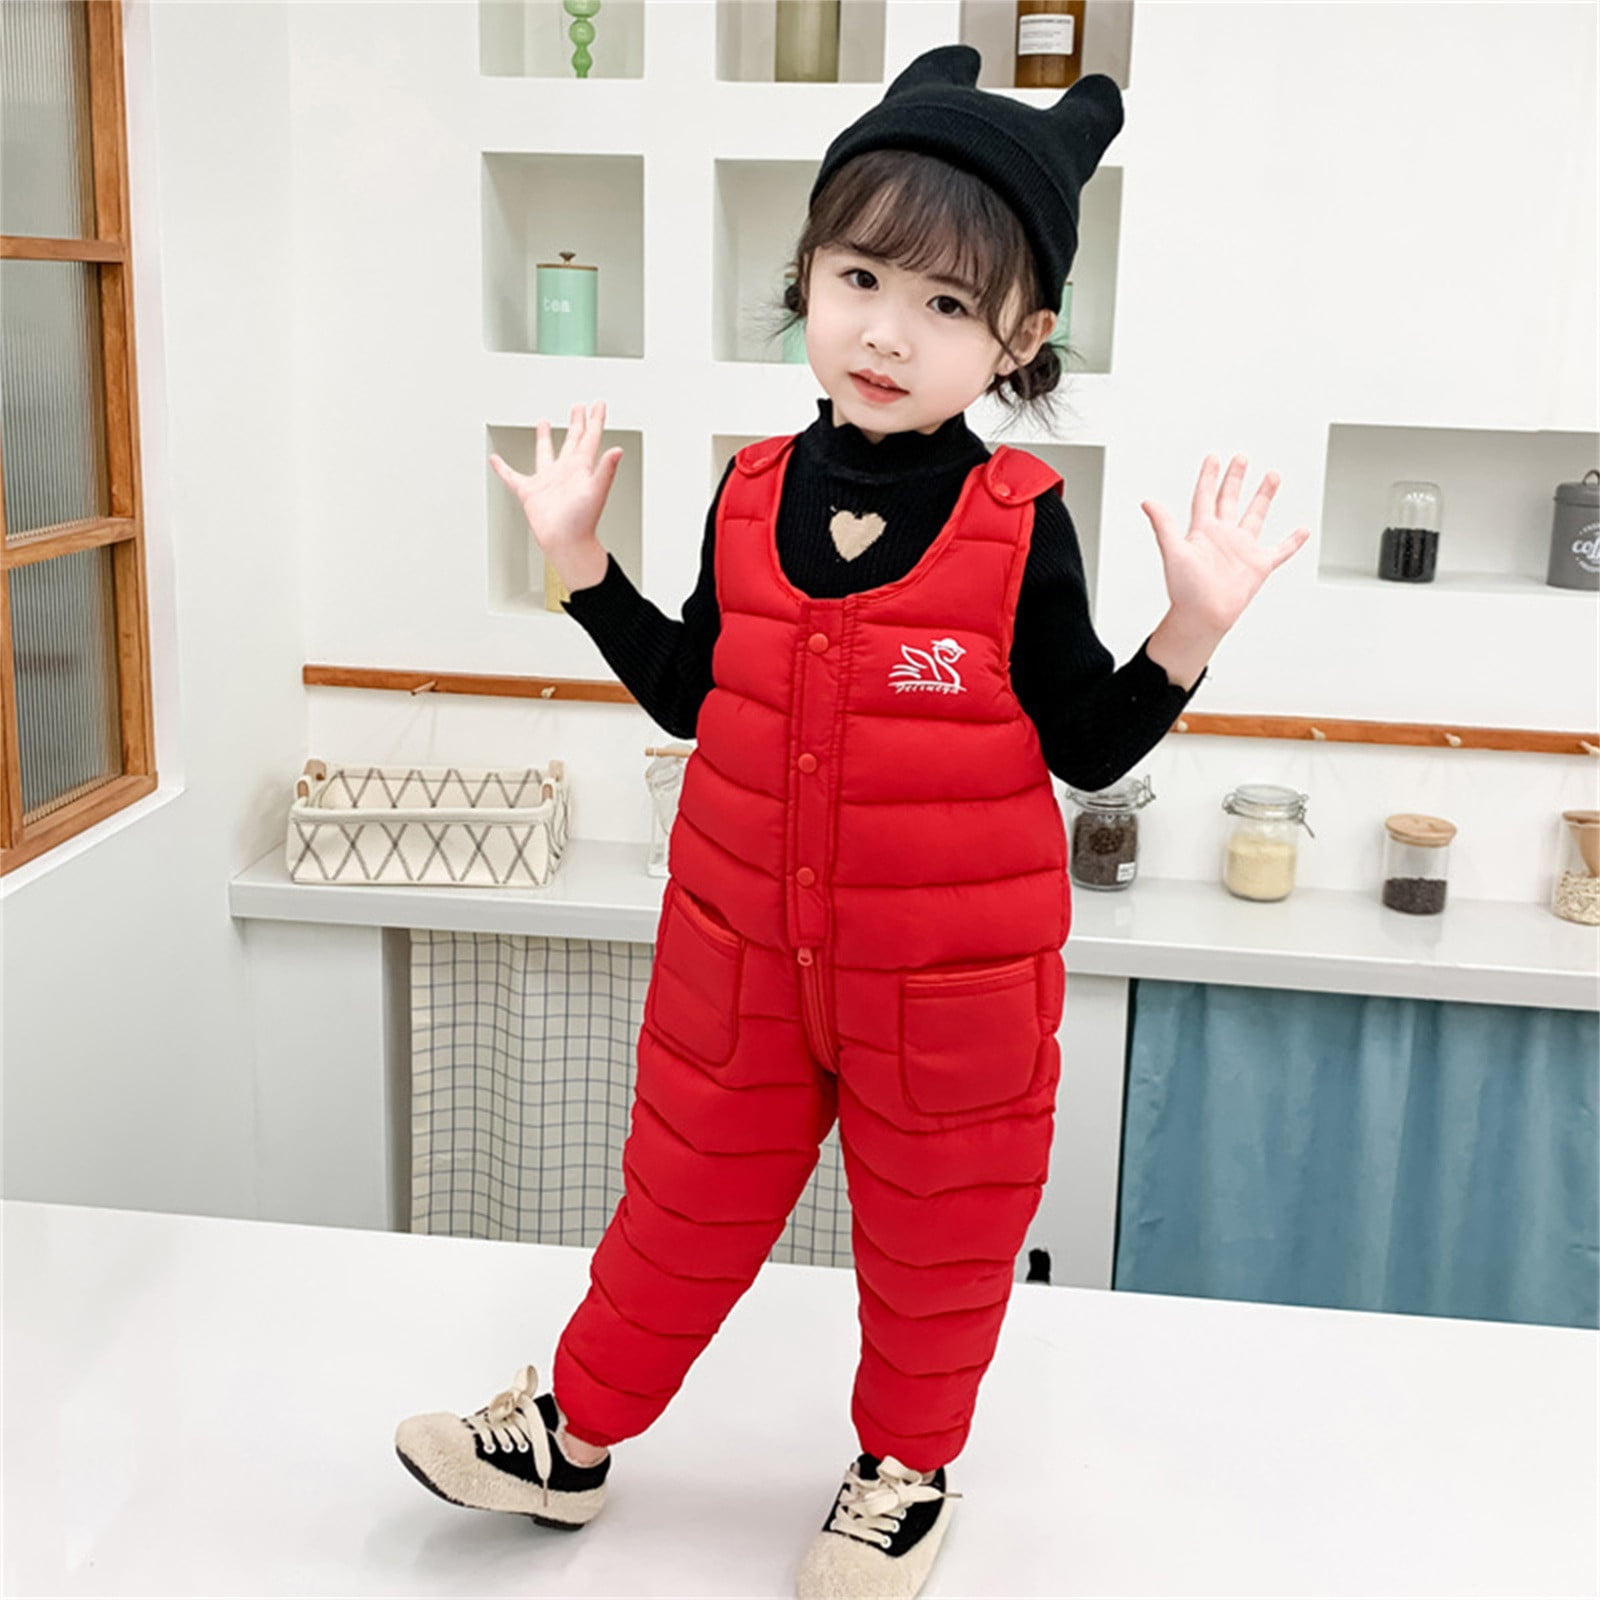 Brand Baby Girl Vest Plaid Cute Romper Sum Hat Clothing Summer 2021 Sets  For Bbies Children Newborn Baby Girl Clothes Overalls